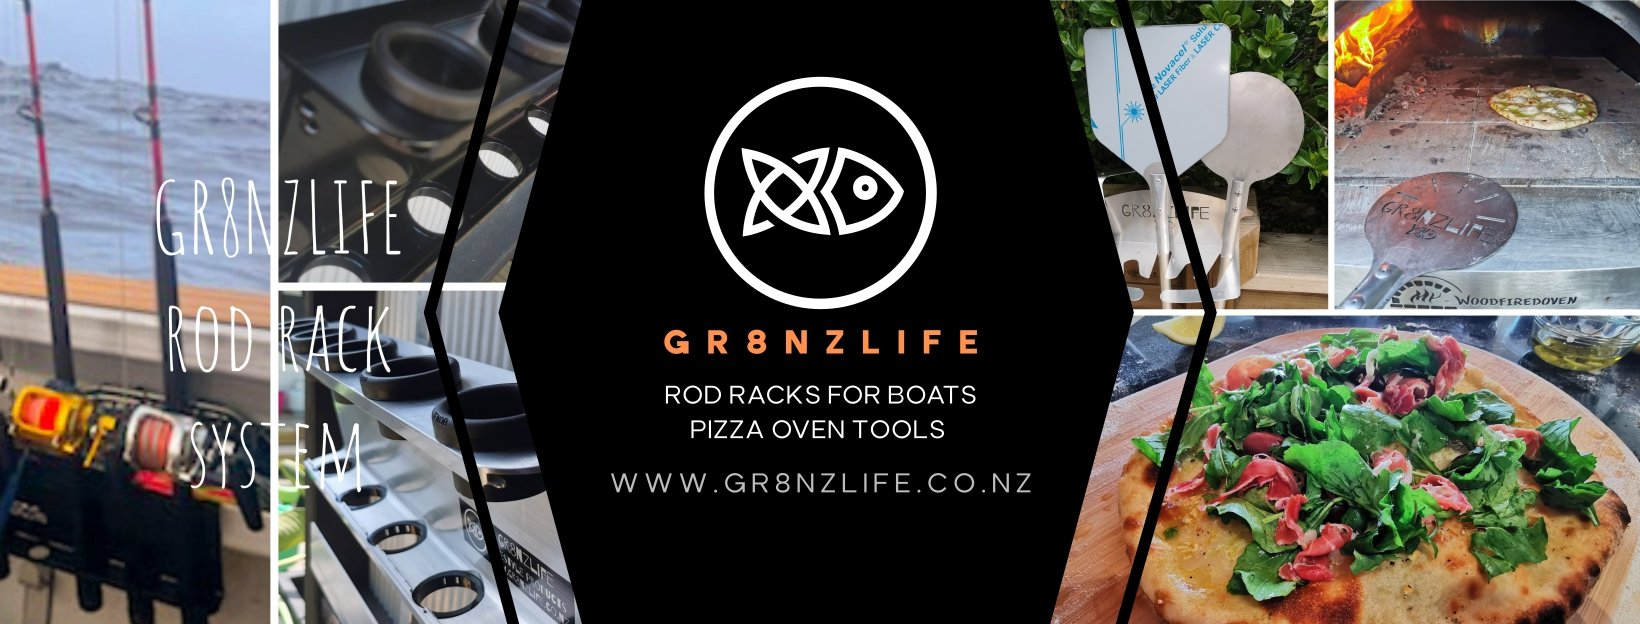 GR8 NZ LIFE GIFT CARDS (Pizza oven Tools) ( Rod and Reel Racks) - Gr8nzlife